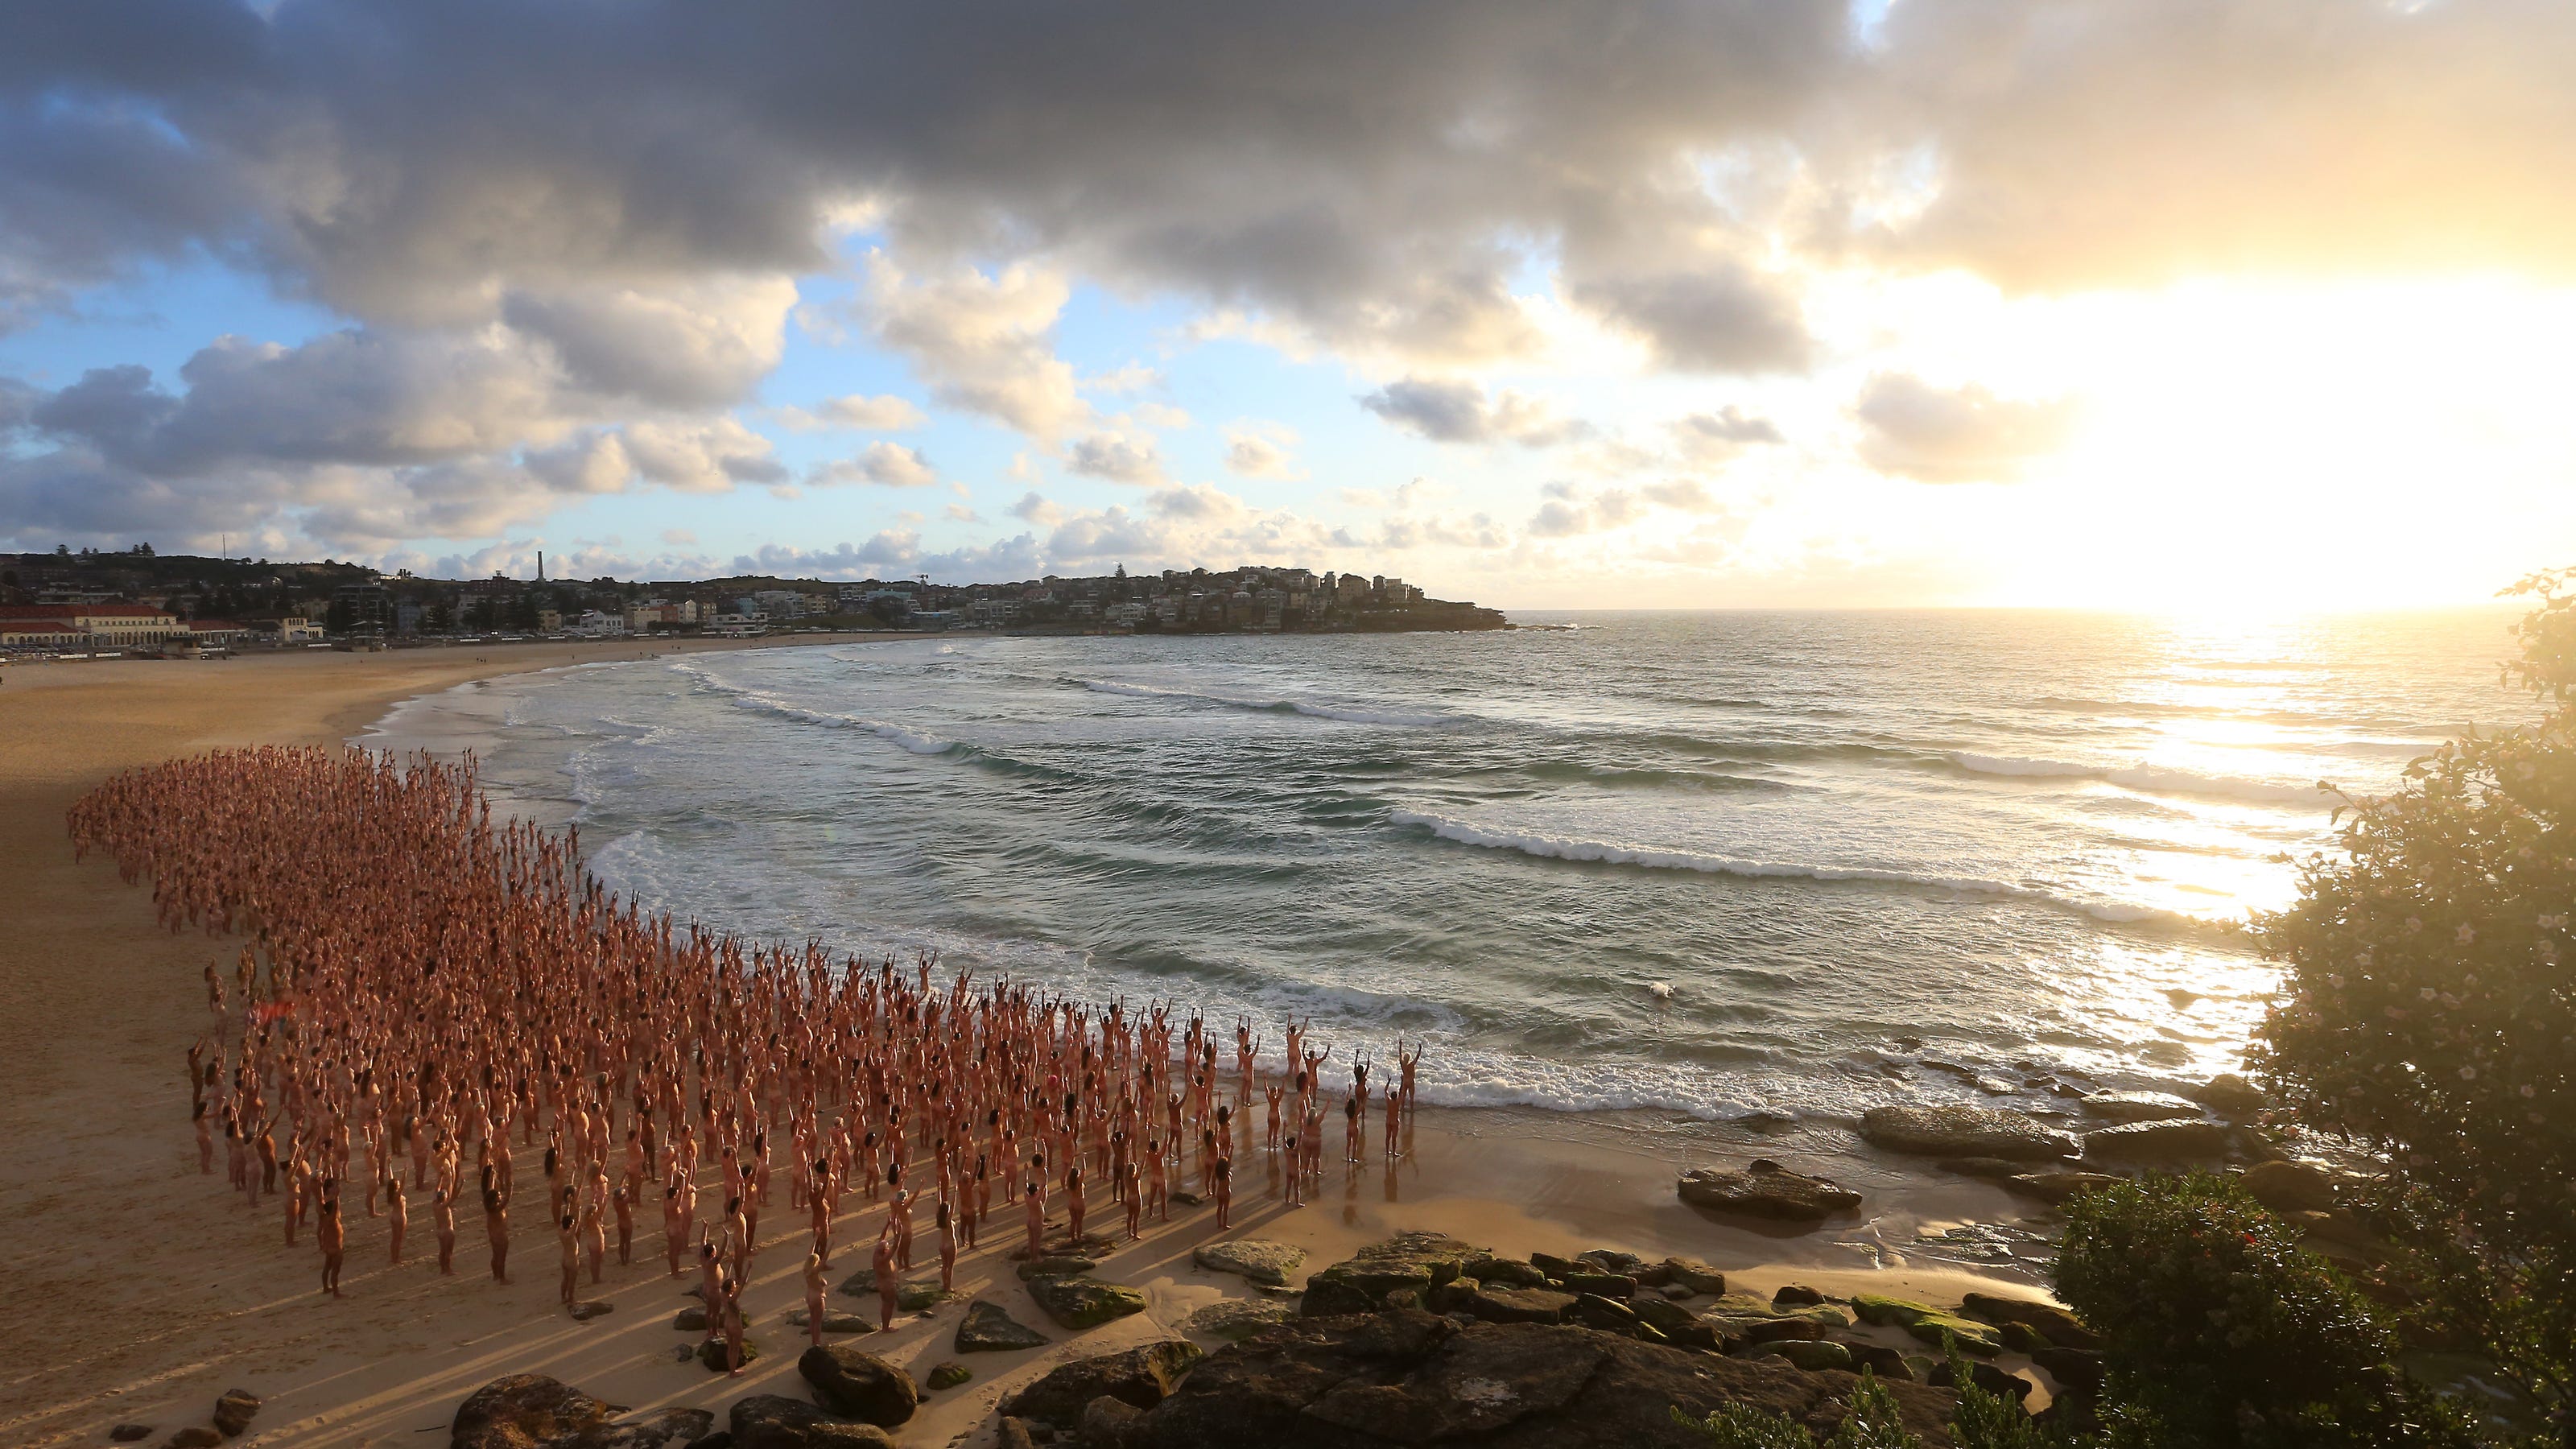 Nude Beach Nudes - Thousands pose nude at Australian beach in Spencer Tunick photo shoot